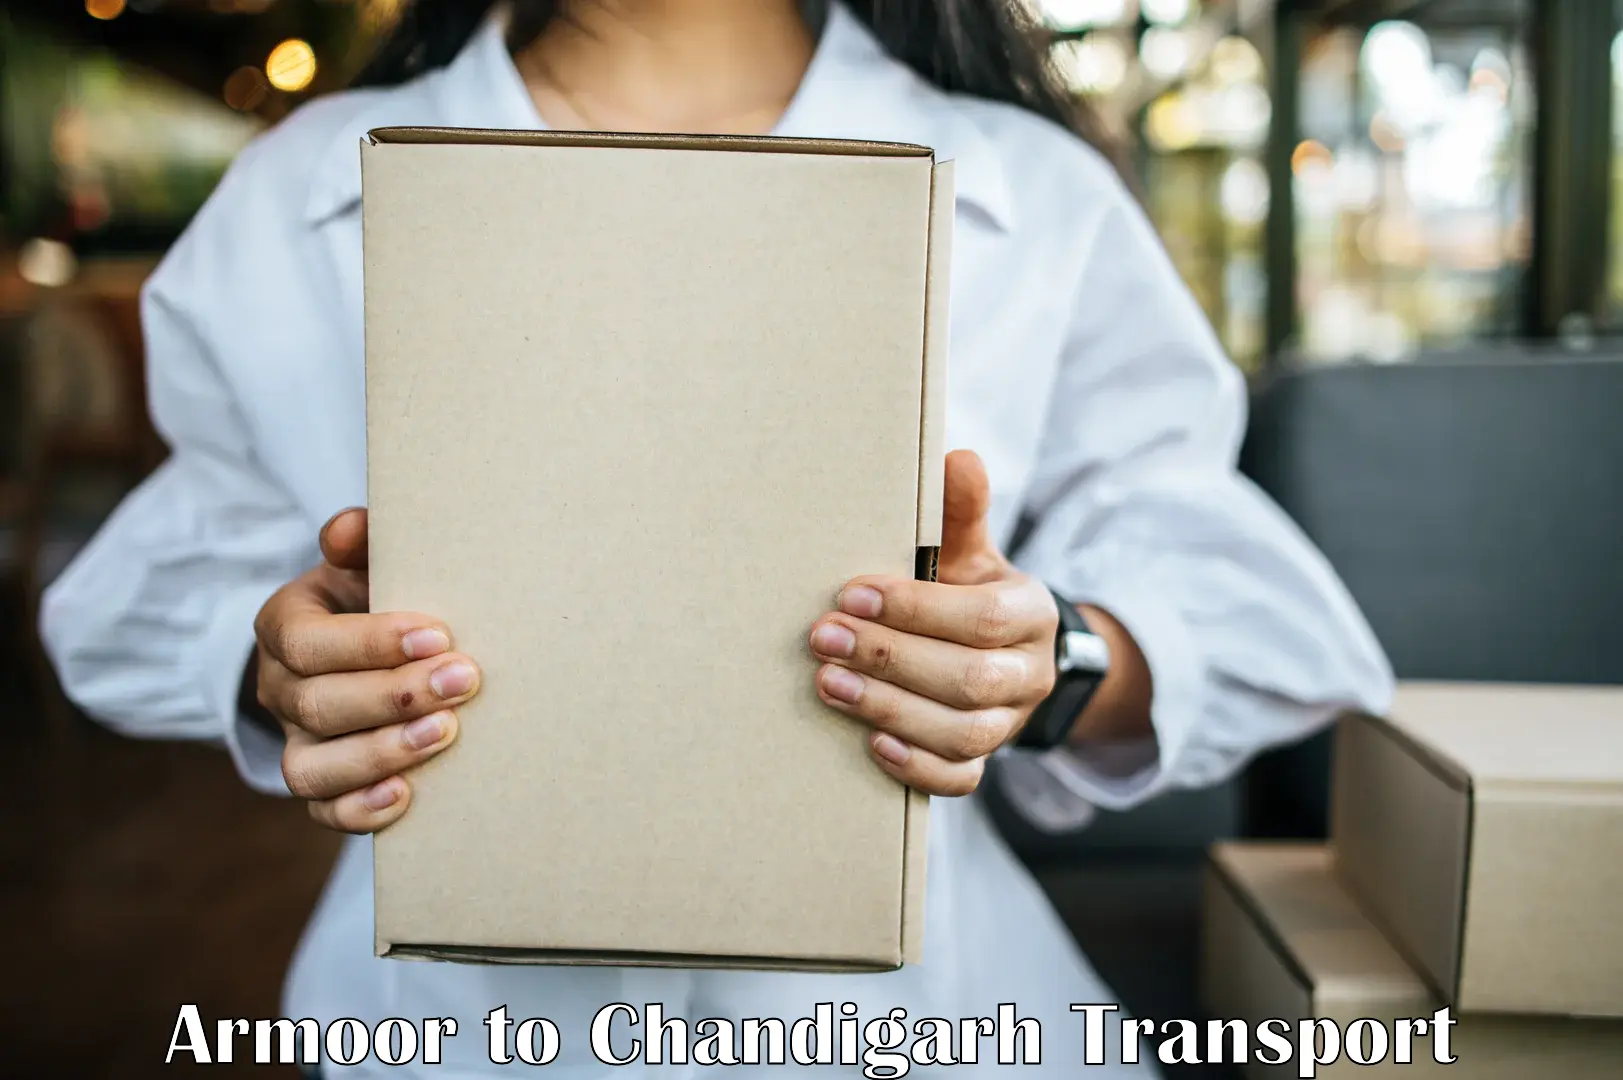 Road transport online services Armoor to Chandigarh